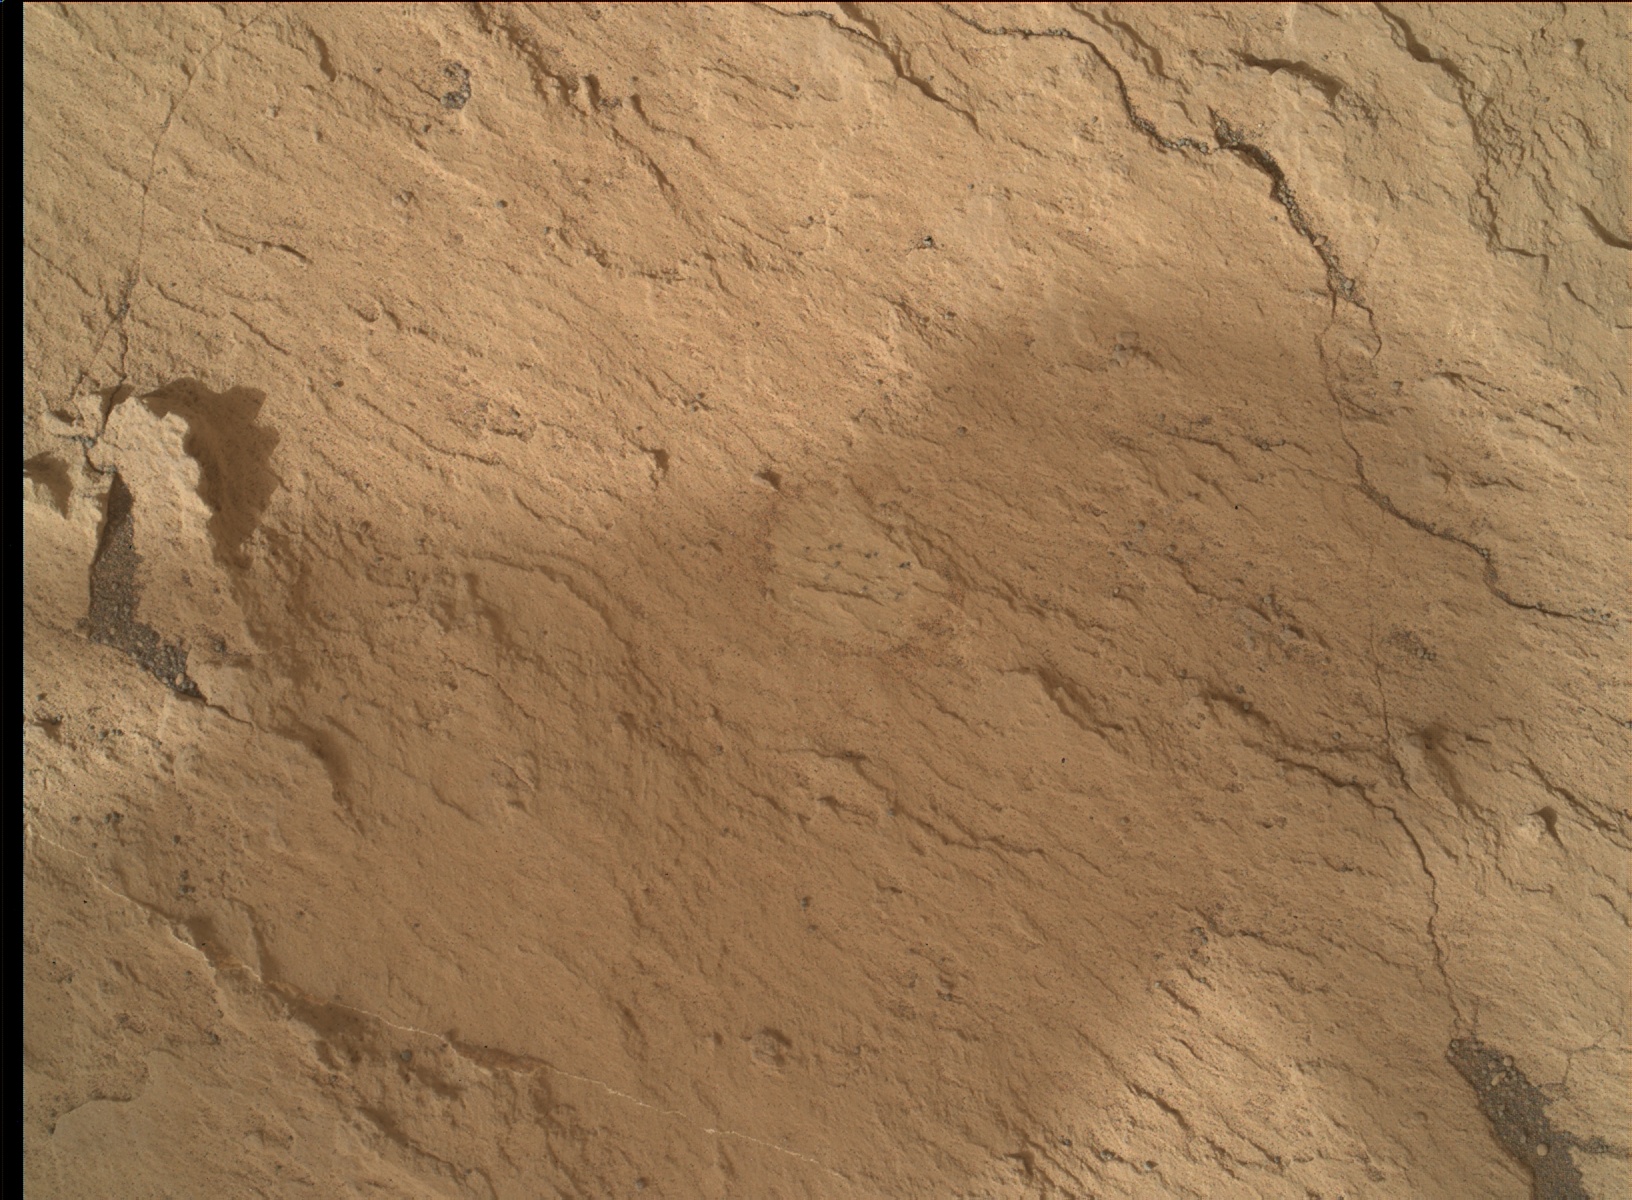 Nasa's Mars rover Curiosity acquired this image using its Mars Hand Lens Imager (MAHLI) on Sol 1681